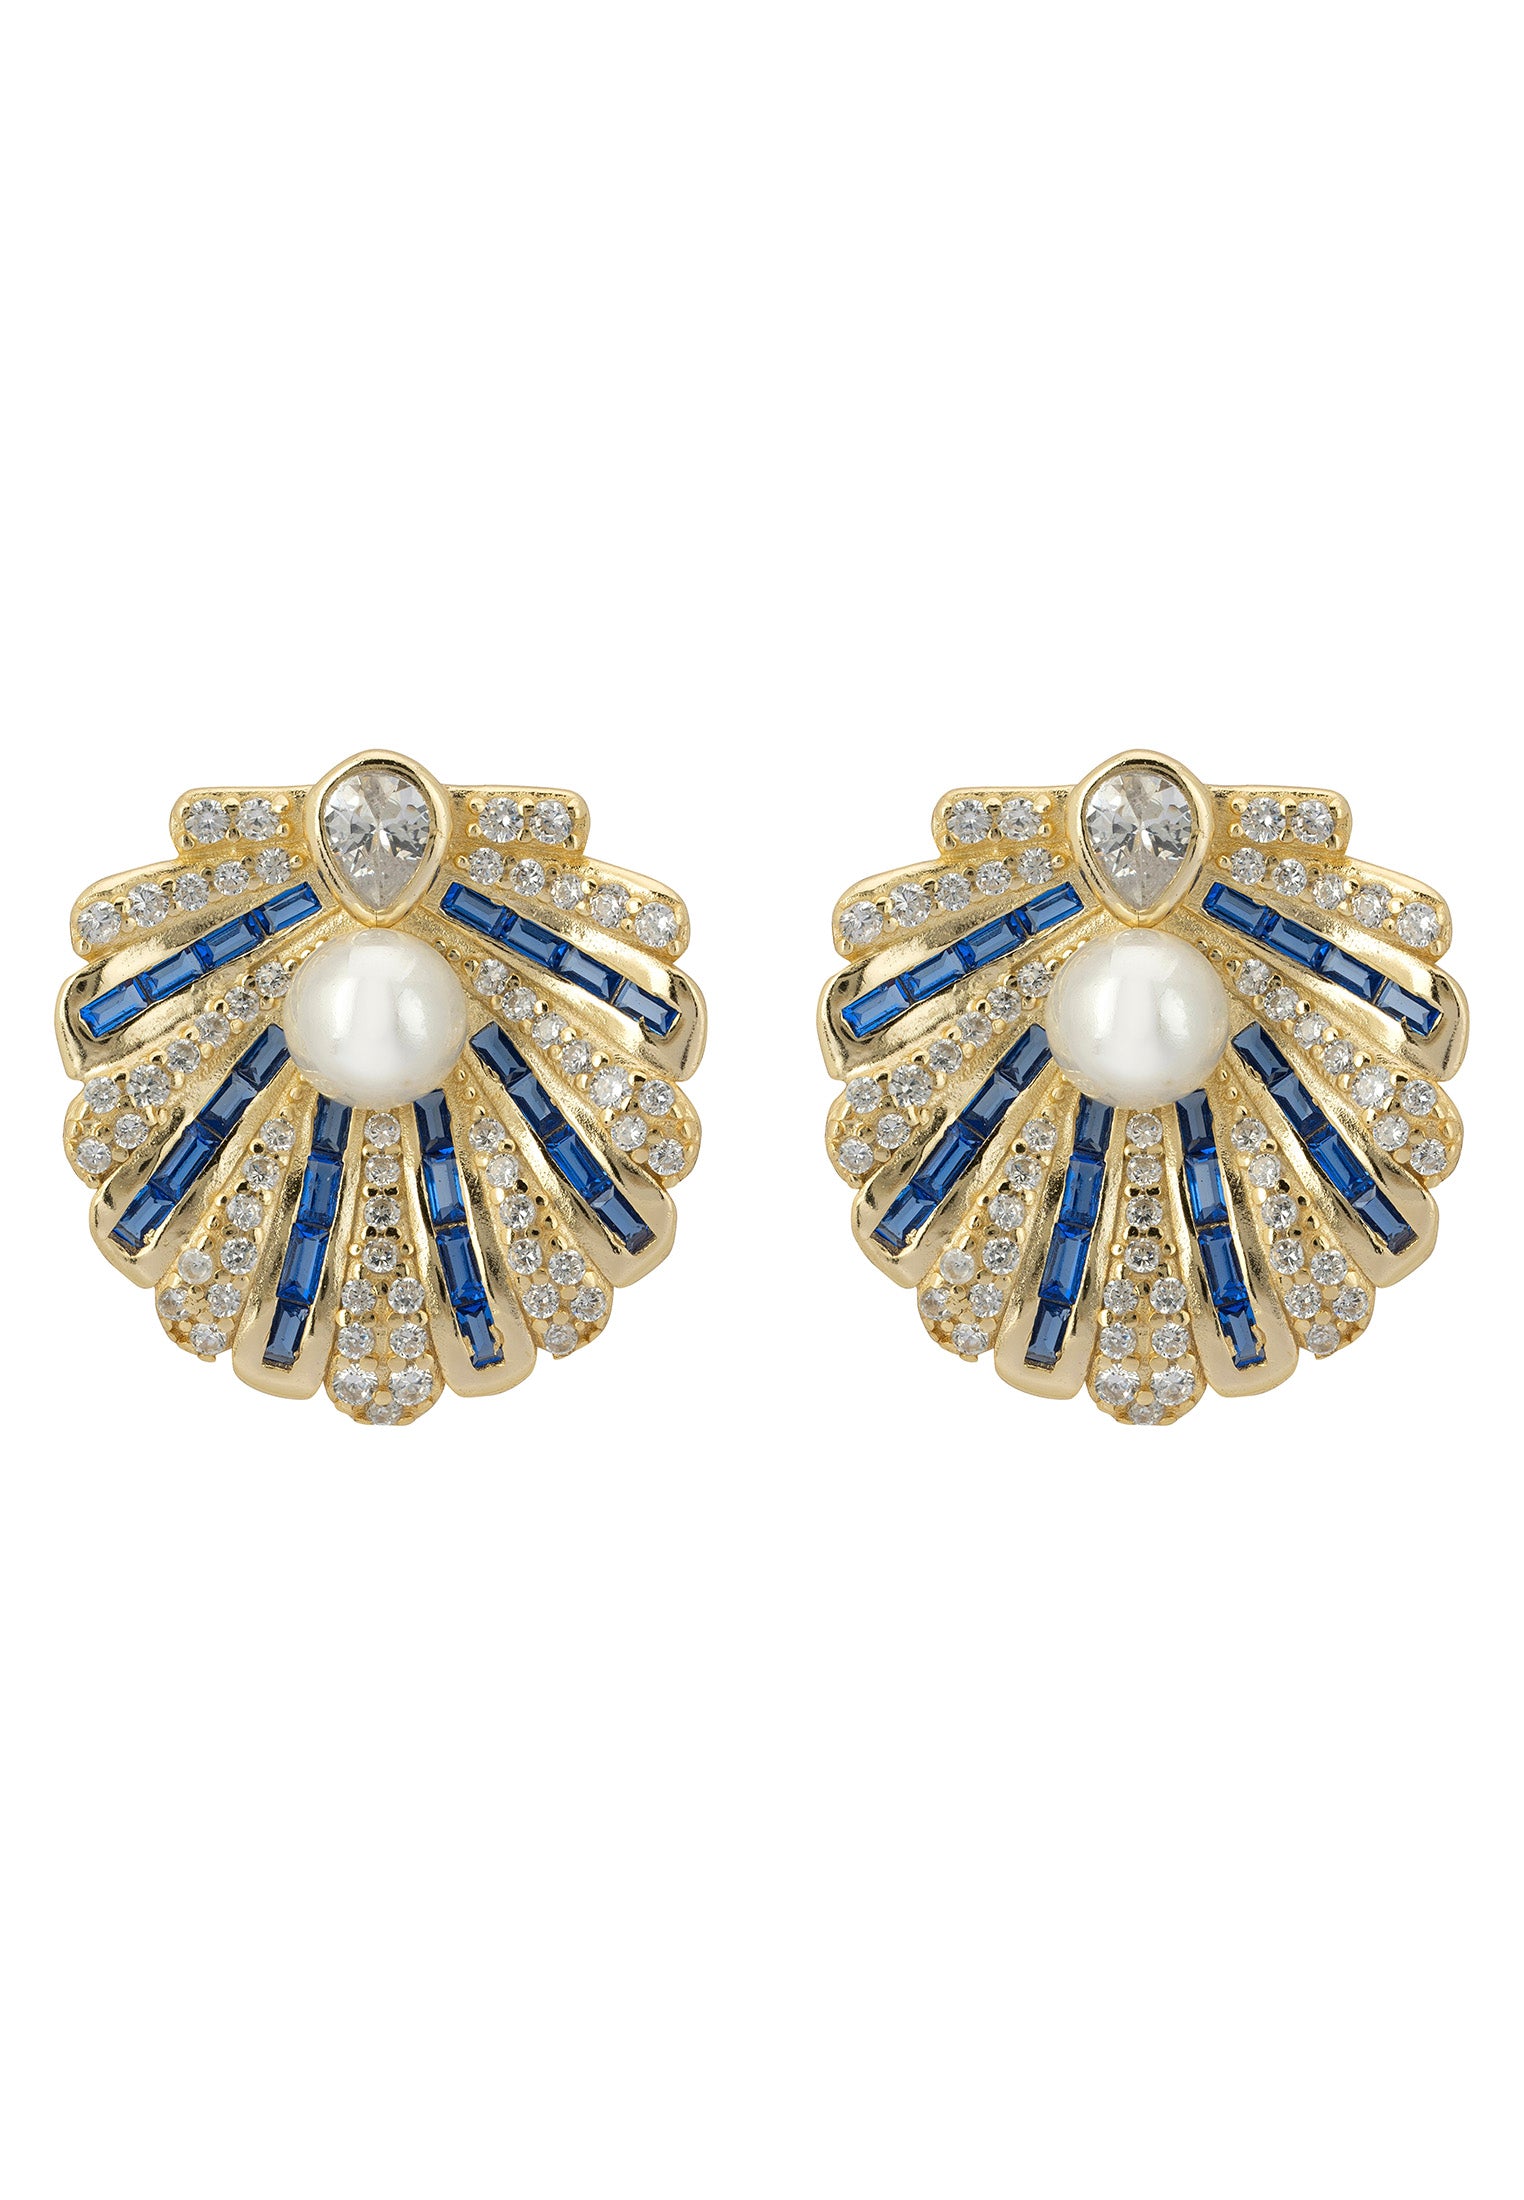 Art Deco Scallop Shell Earrings Sapphire Blue With Pearl Gold